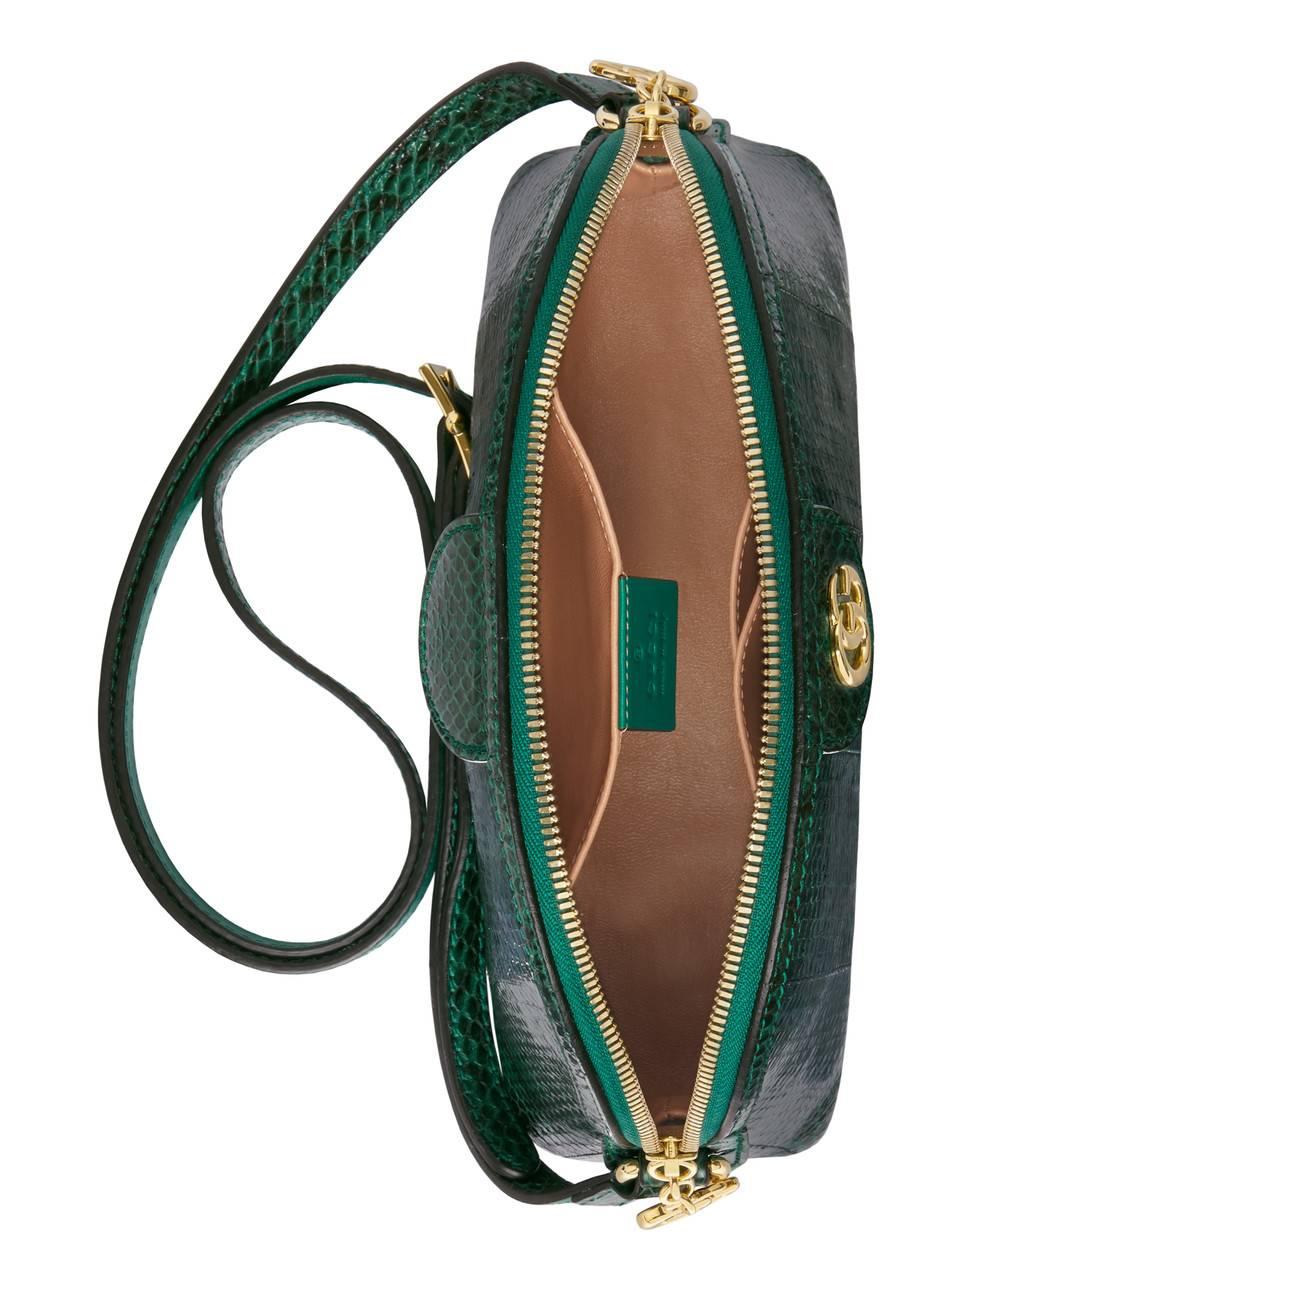 Gucci Ophidia Small Snakeskin Shoulder Bag Green in Green - Lyst